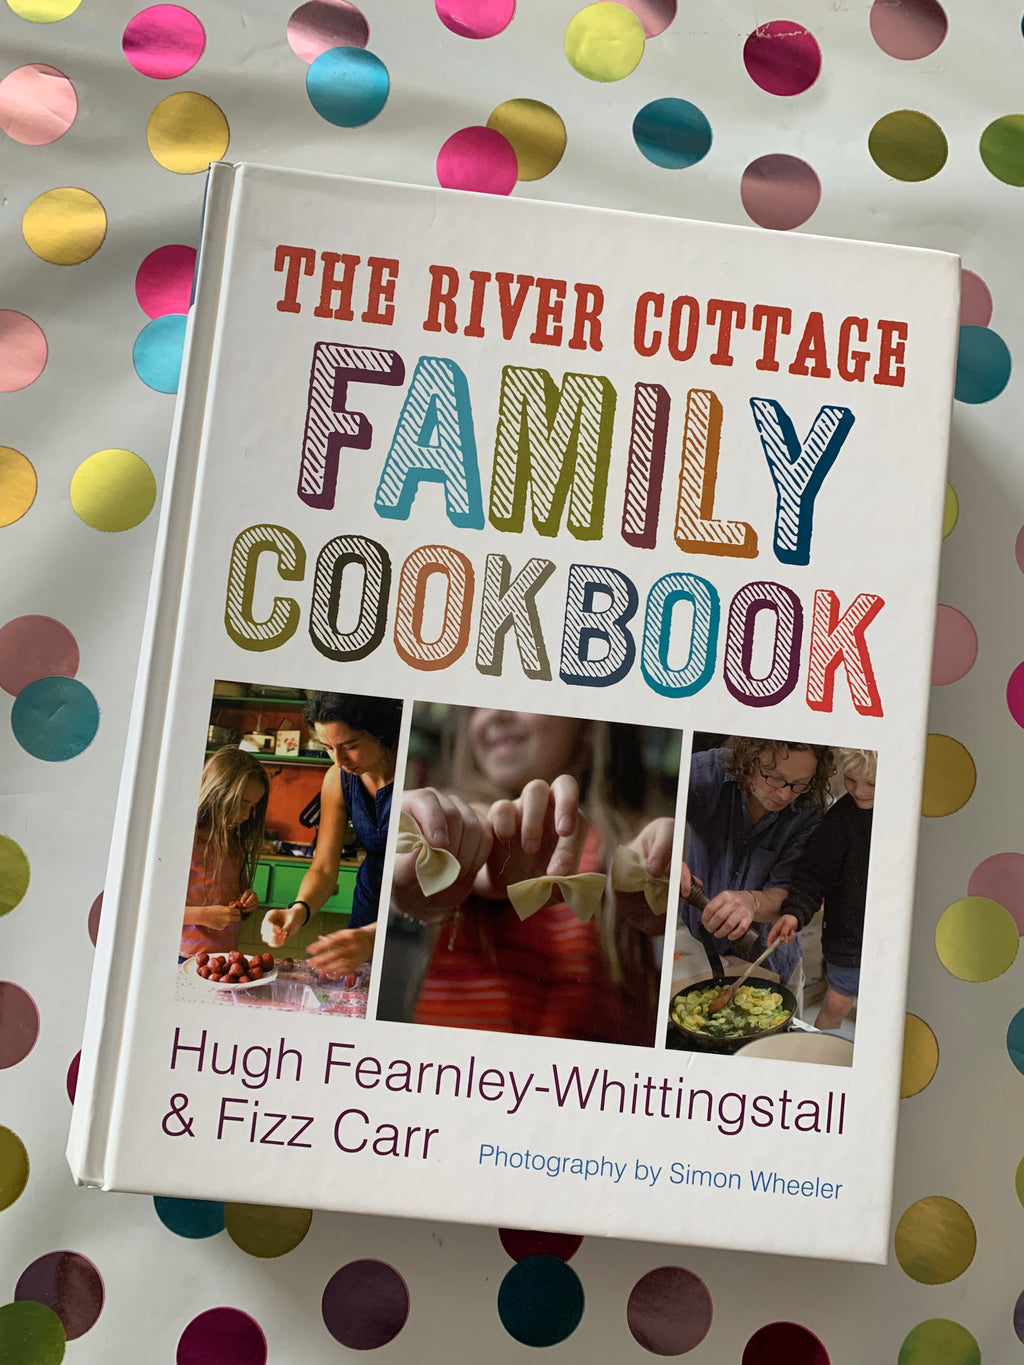 The River Cottage Family Cookbook- By Hugh Fearnley-Whittingstall & Fizz Carr